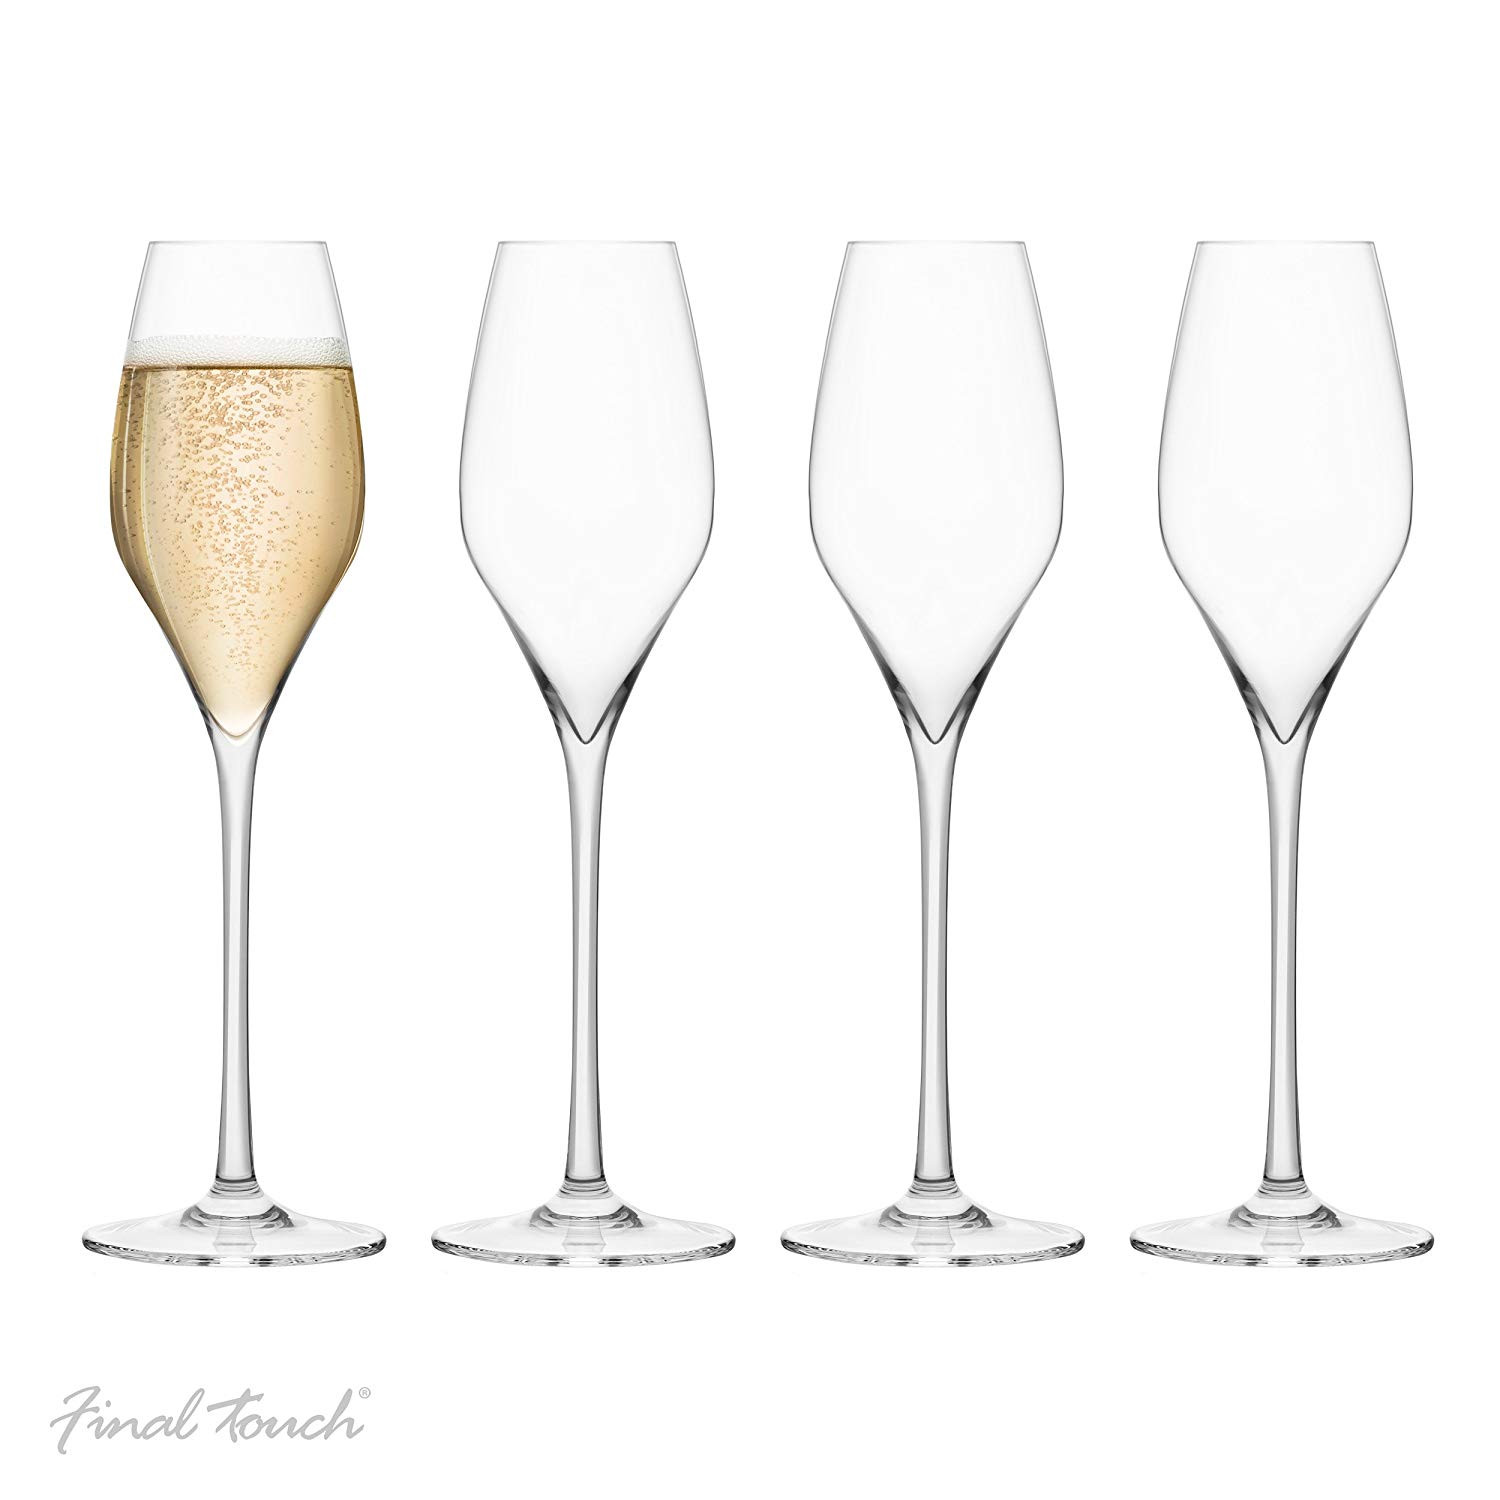 21 Trendy Vintage Waterford Crystal Vase 2024 free download vintage waterford crystal vase of final touch crystal wine champagne flutes 4x vintage flute dinner in a set of four beautiful champagne glasses made with lead free crystal and a titanium re